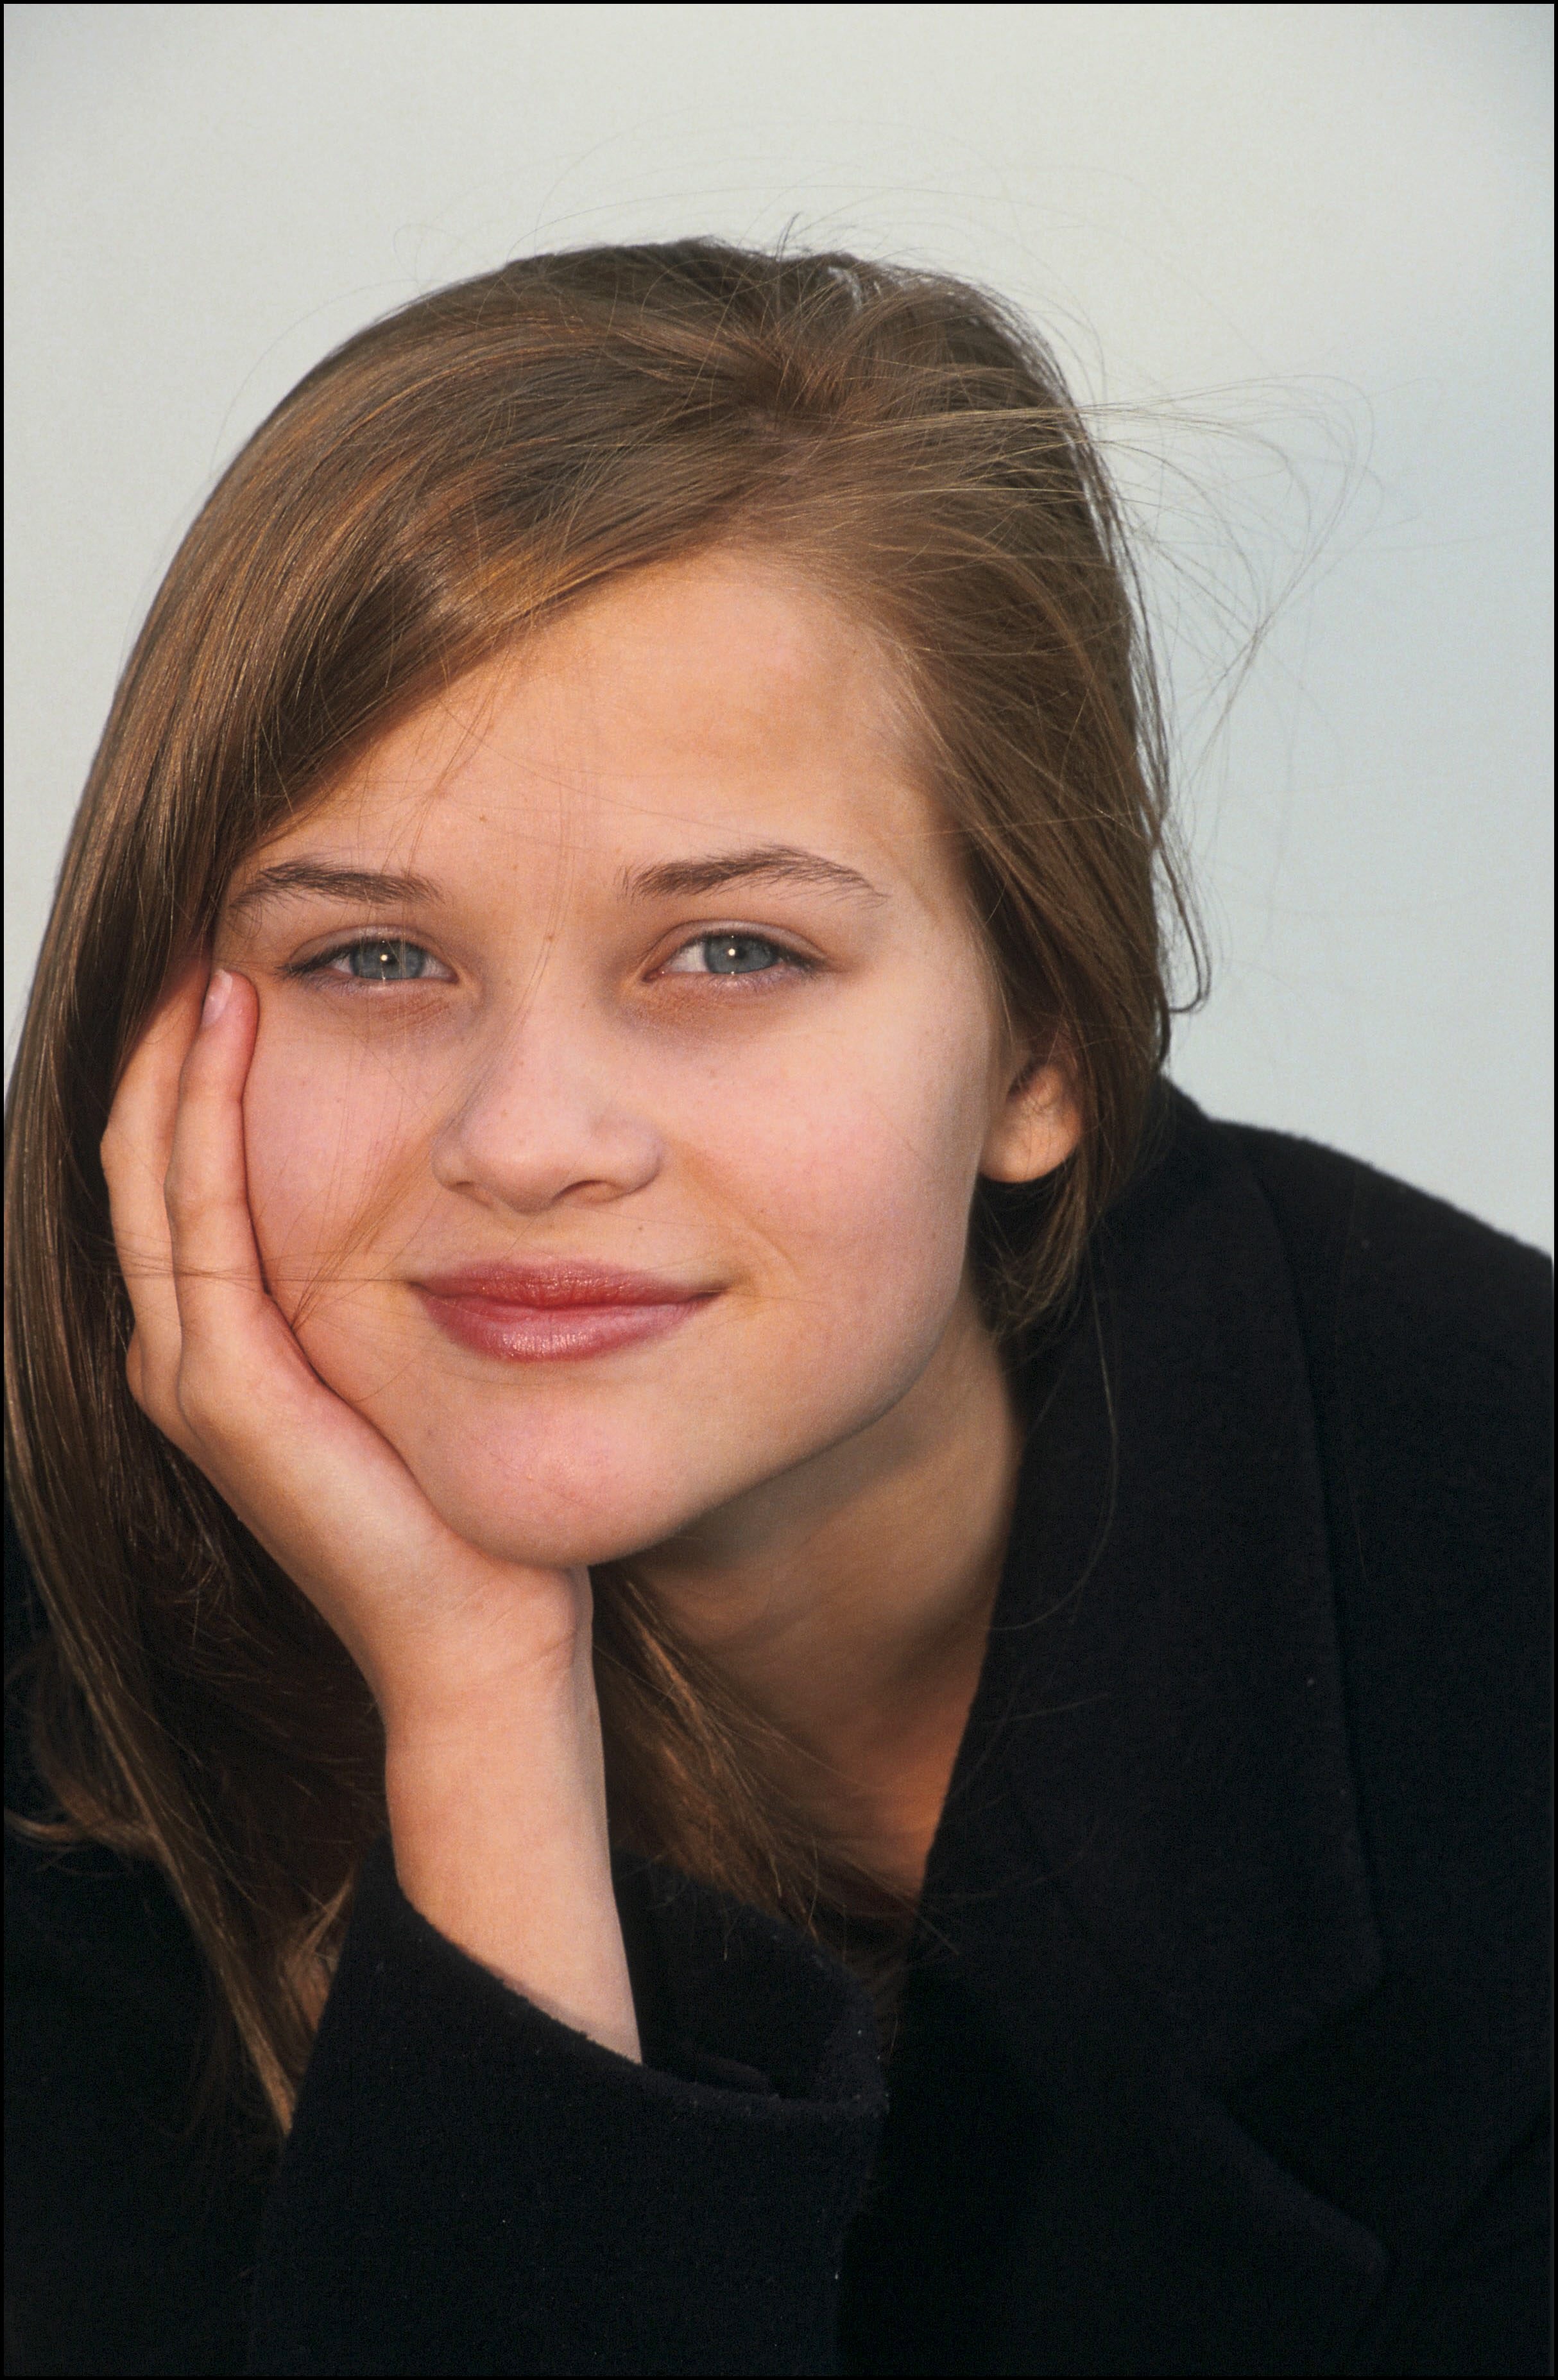 Reese Witherspoon am 8. September 1991 in Deauville, Frankreich | Quelle: Getty Images